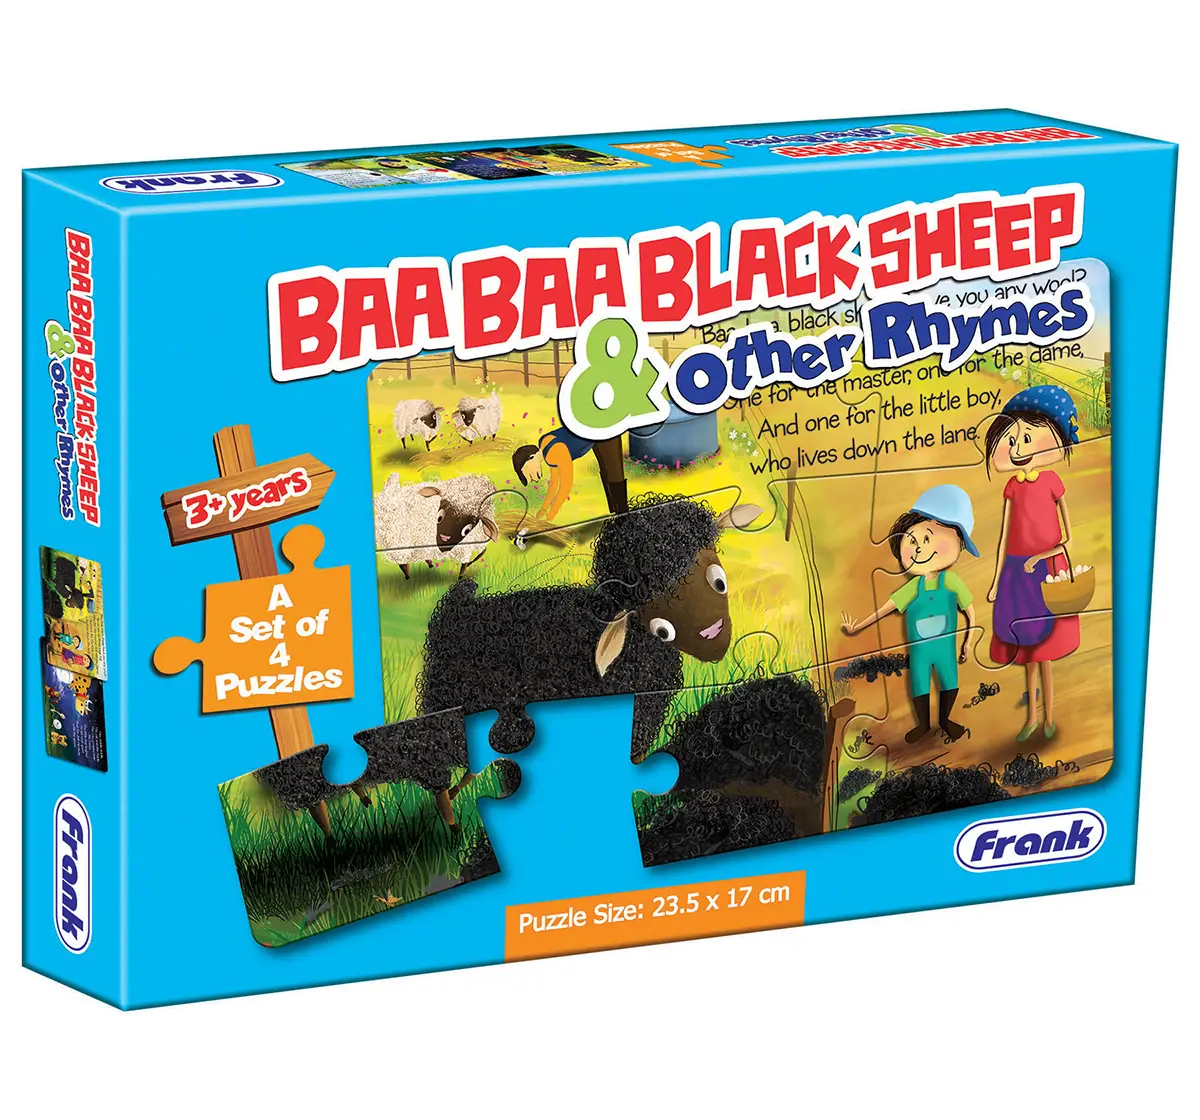 Frank Baa Baa Black Sheep And Other Rhymes Puzzle for Kids age 3Y+ 